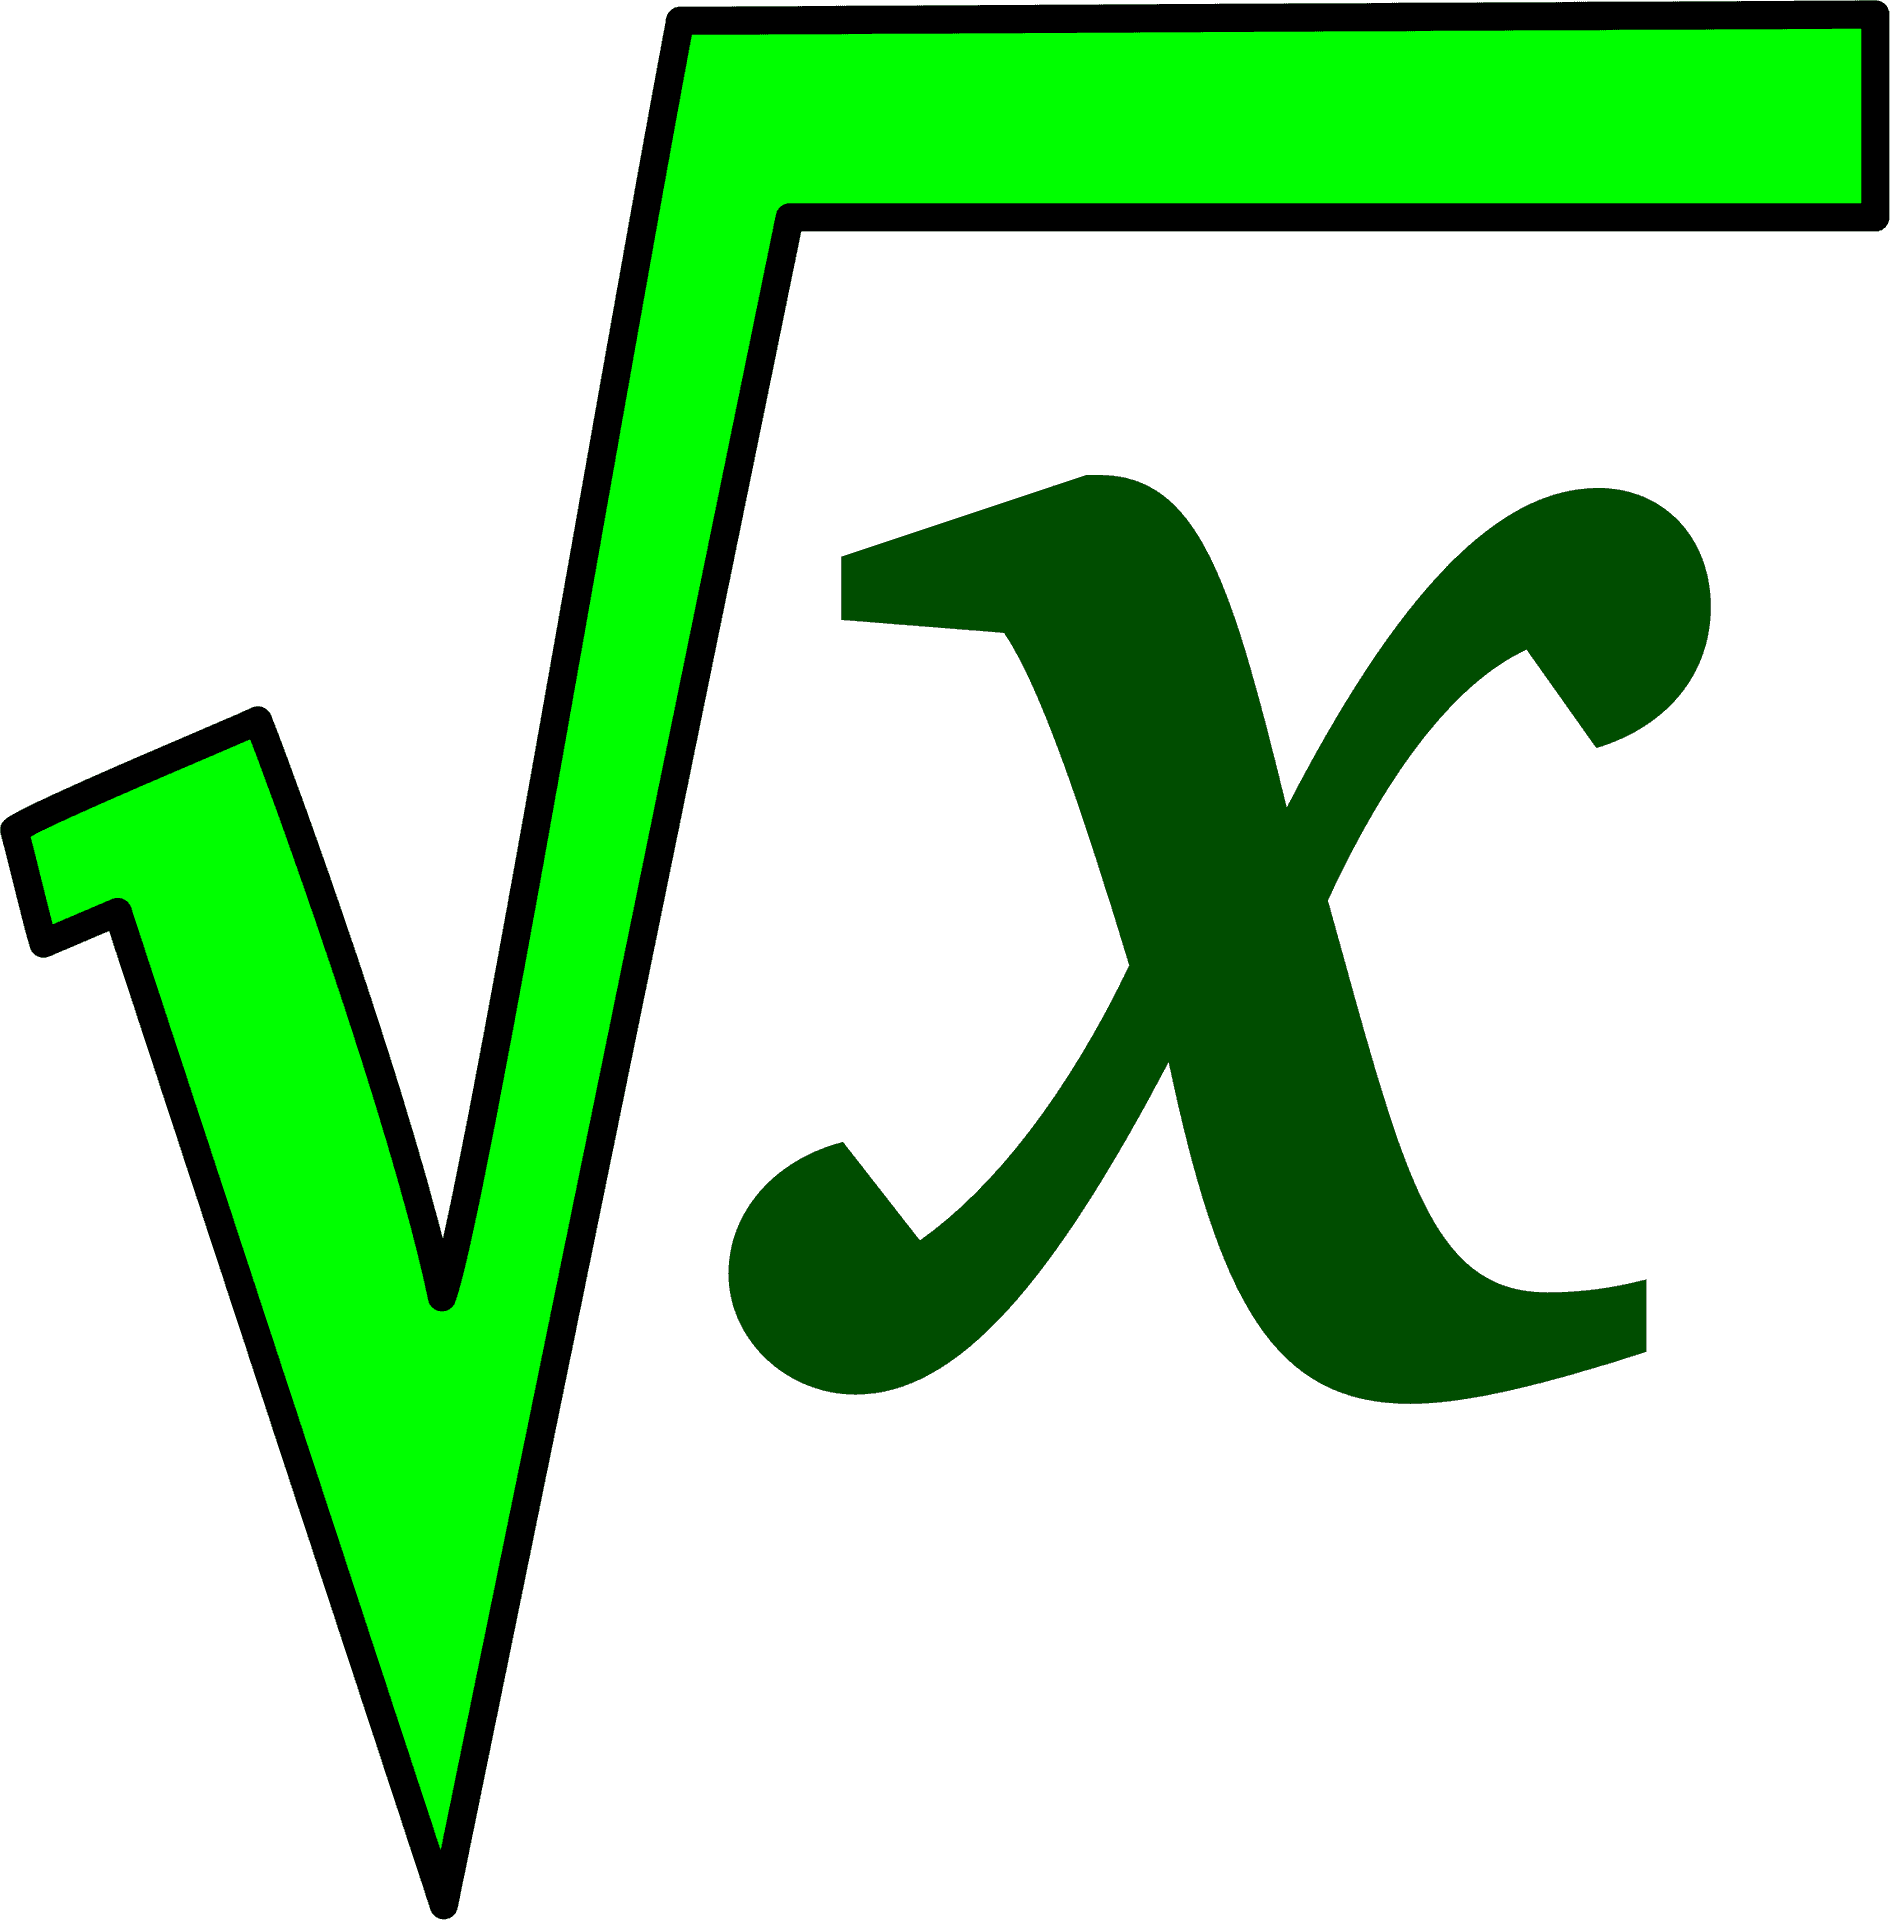 Square Root Symbol Greenon Grey Background.png PNG